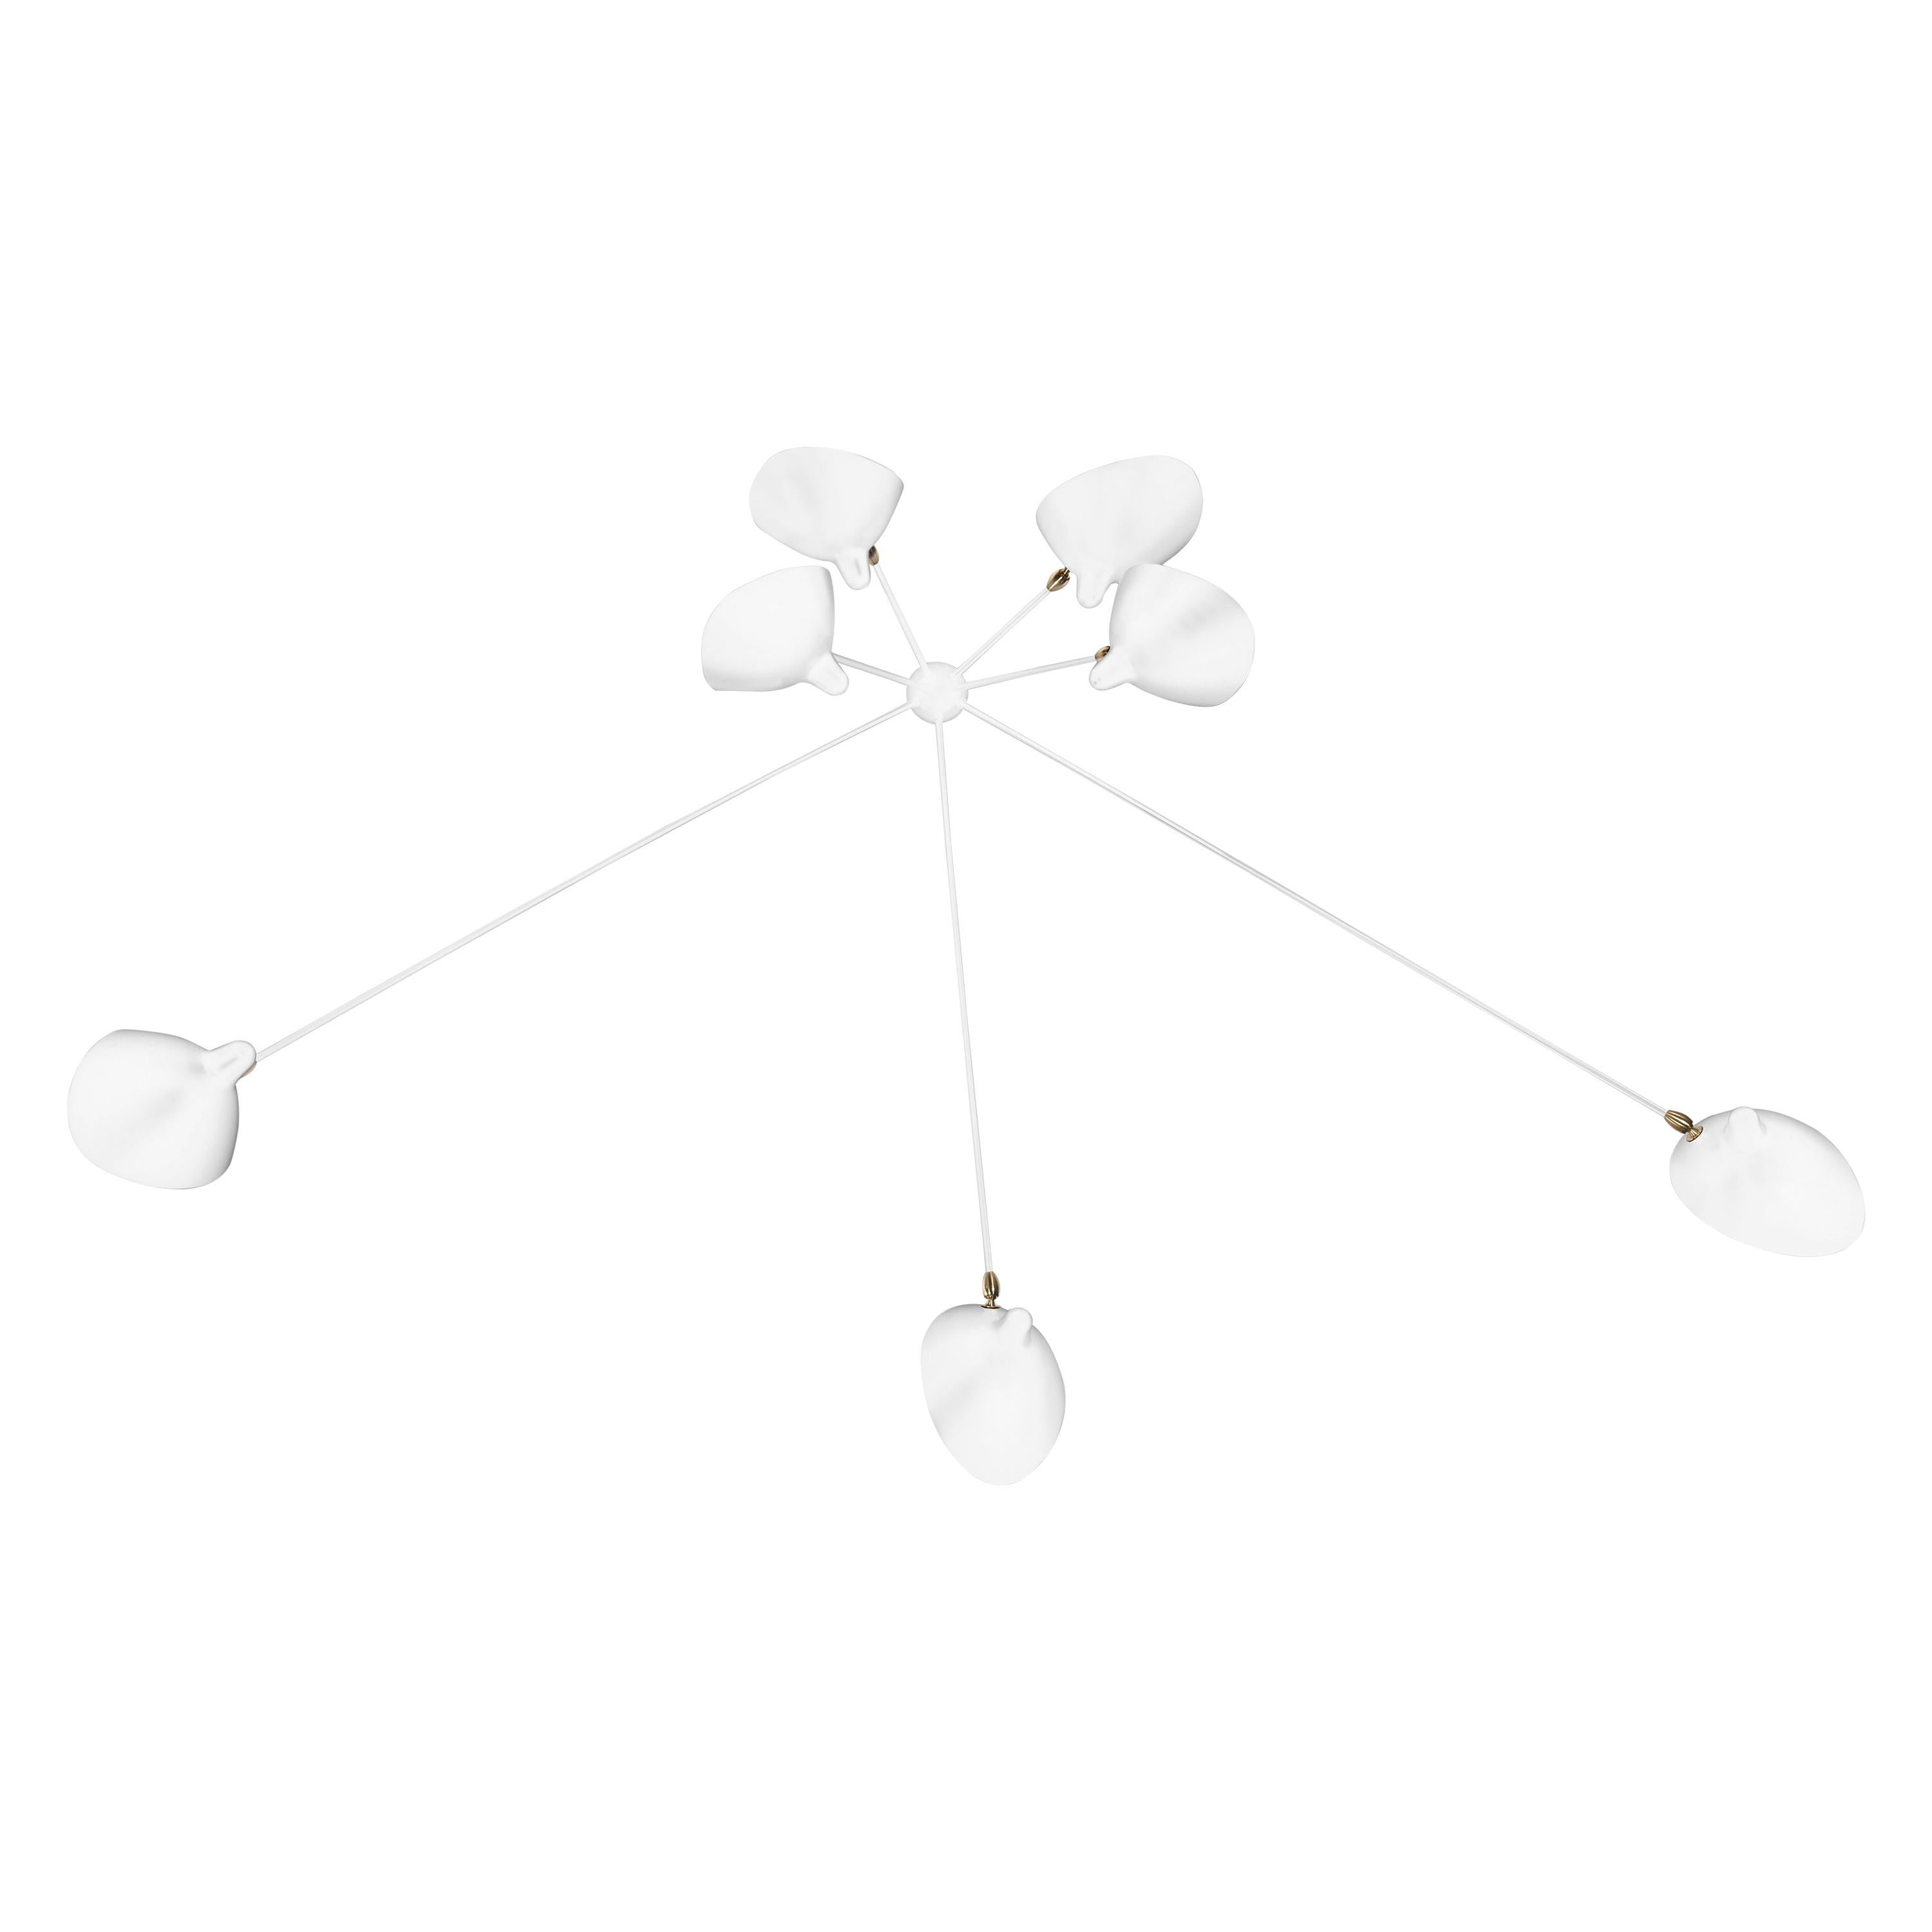 Serge Mouille Mid-Century Modern White Seven Fixed Arms Spider Wall Ceiling Lamp